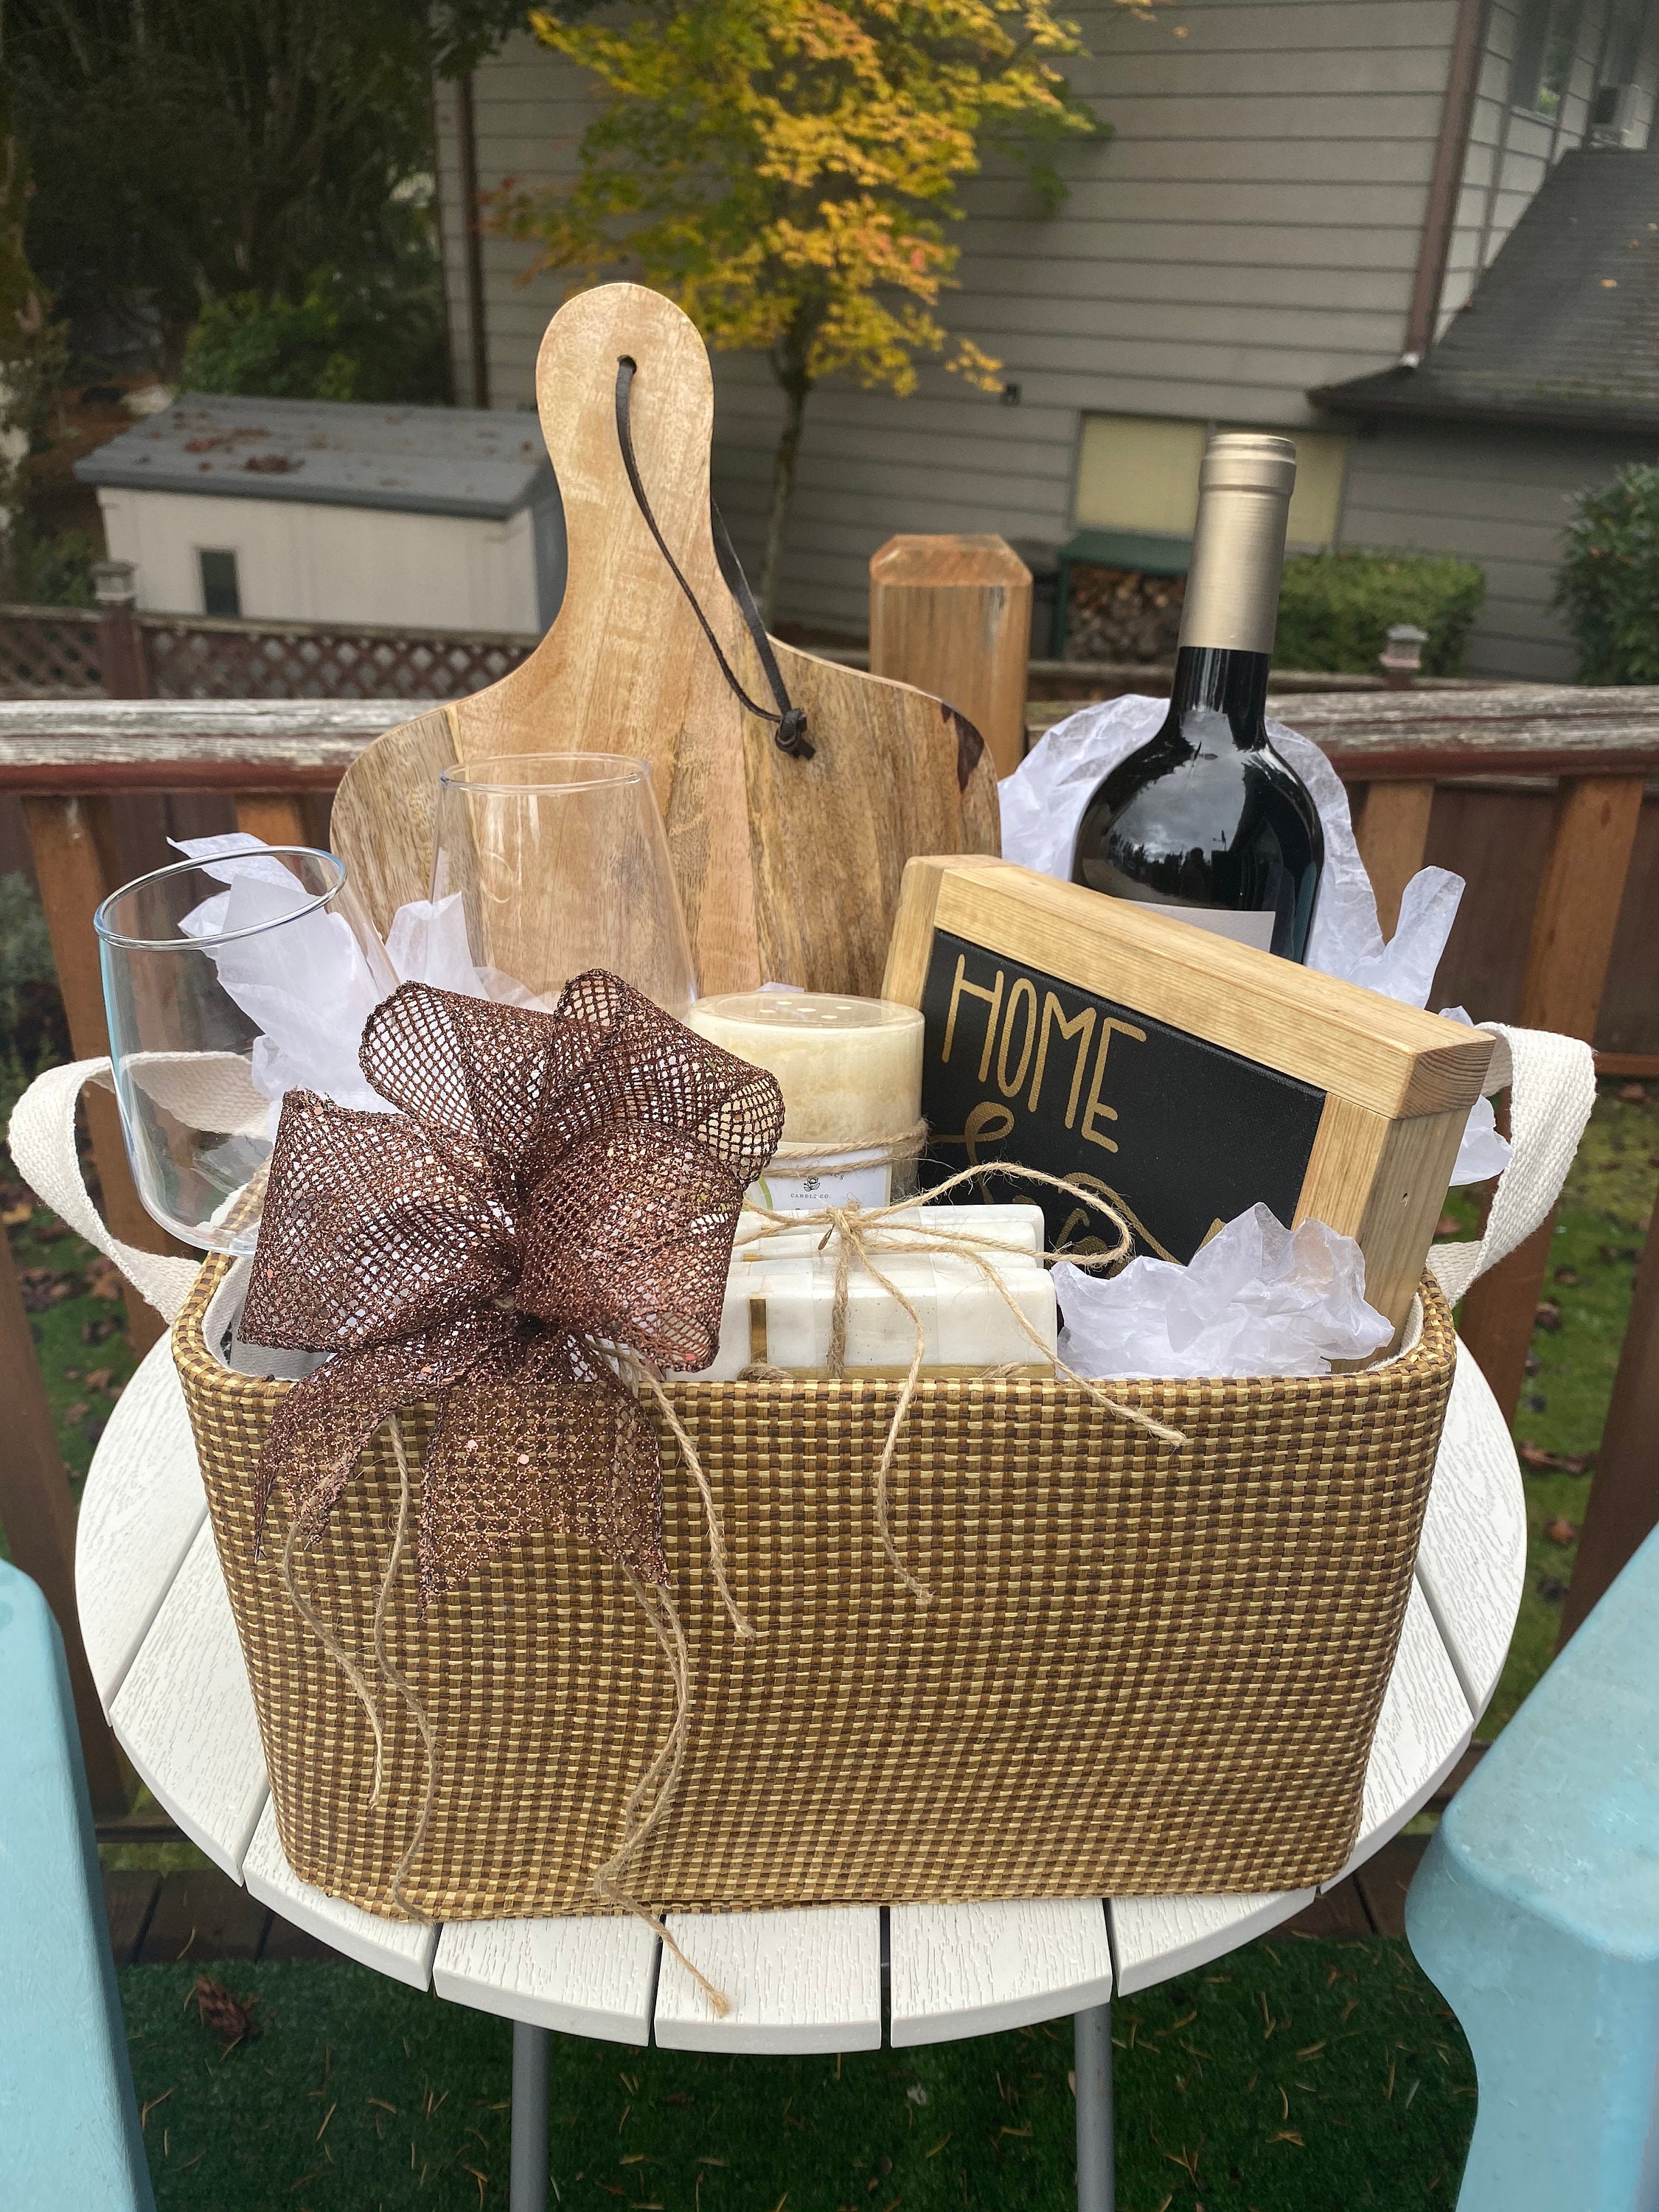 Best friend Wino Gift Basket with Custom Sign | Etsy